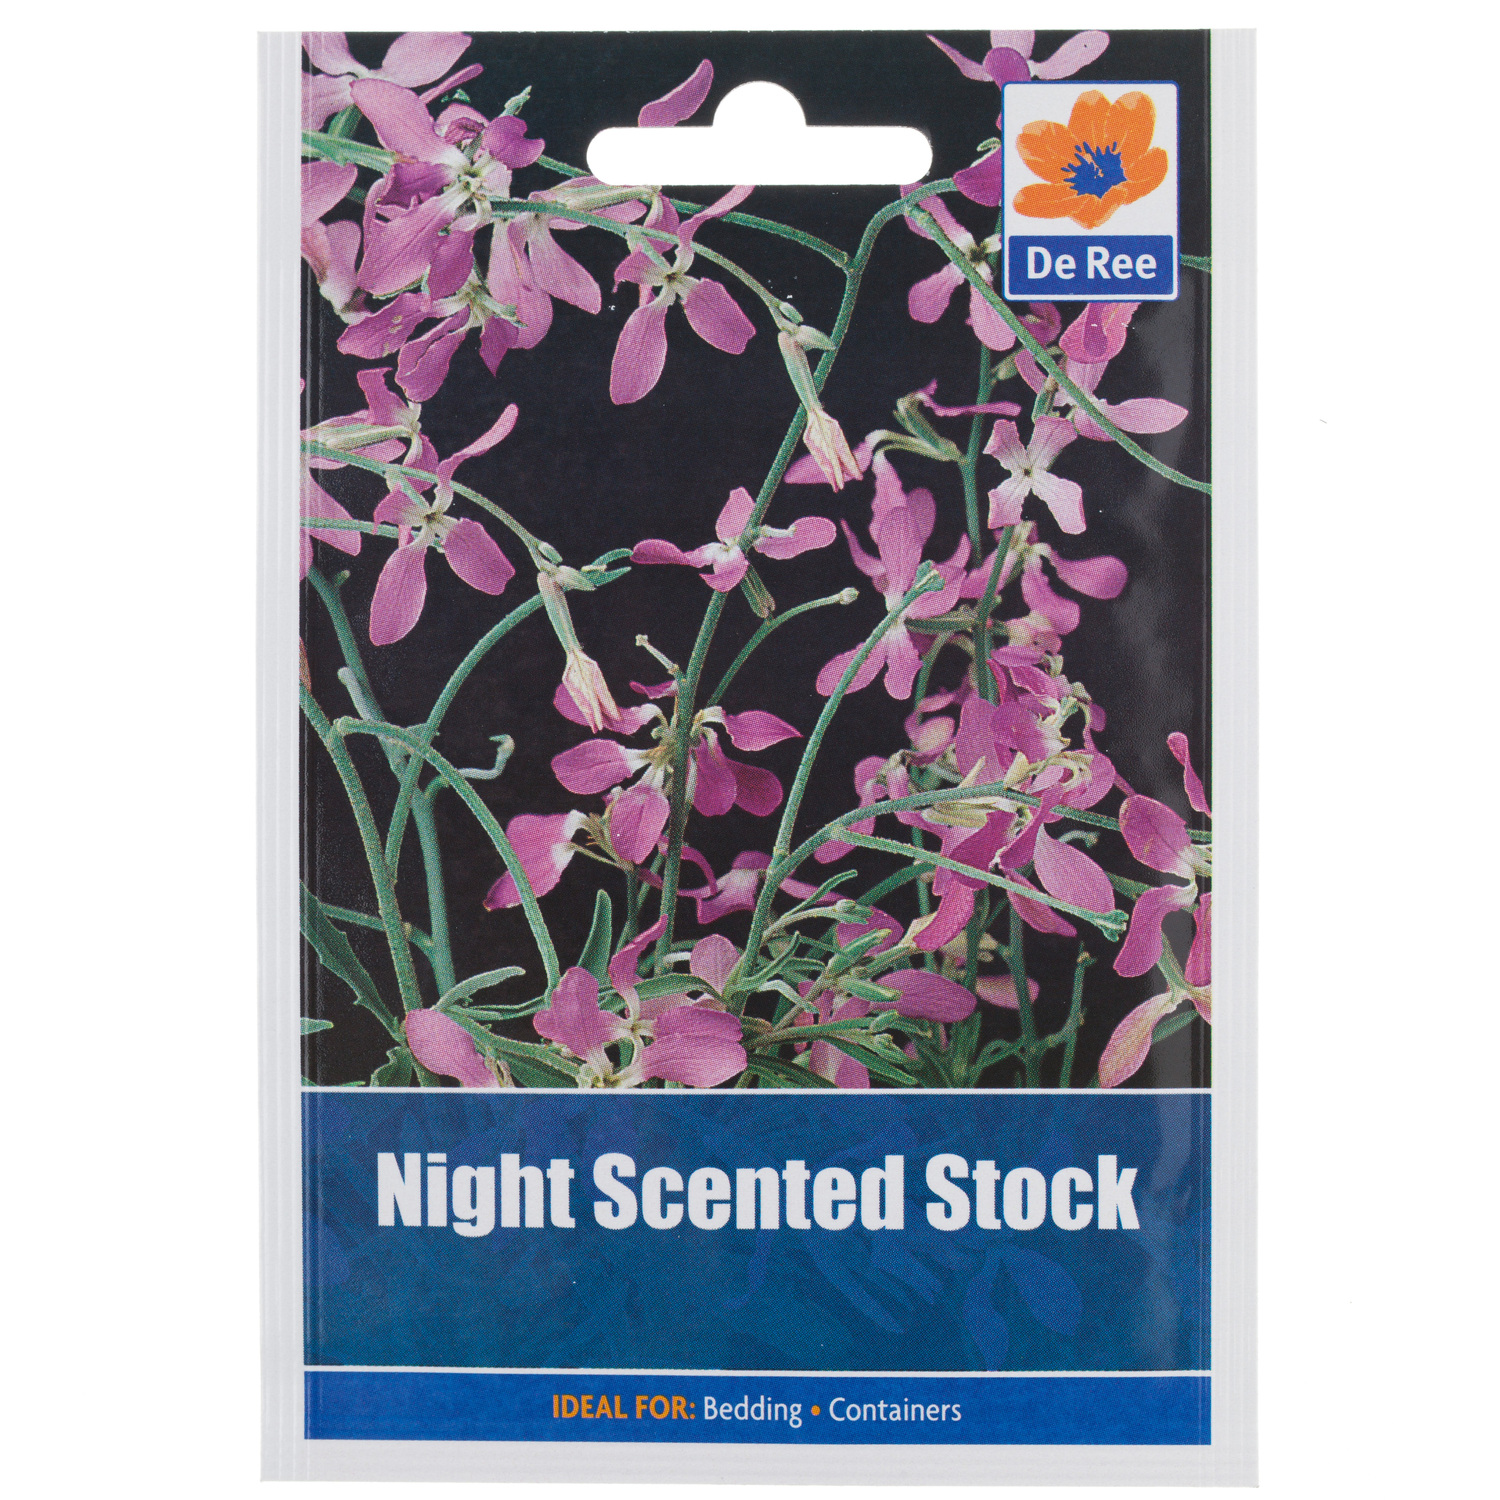 Night Scented Stock Seed Packet Image